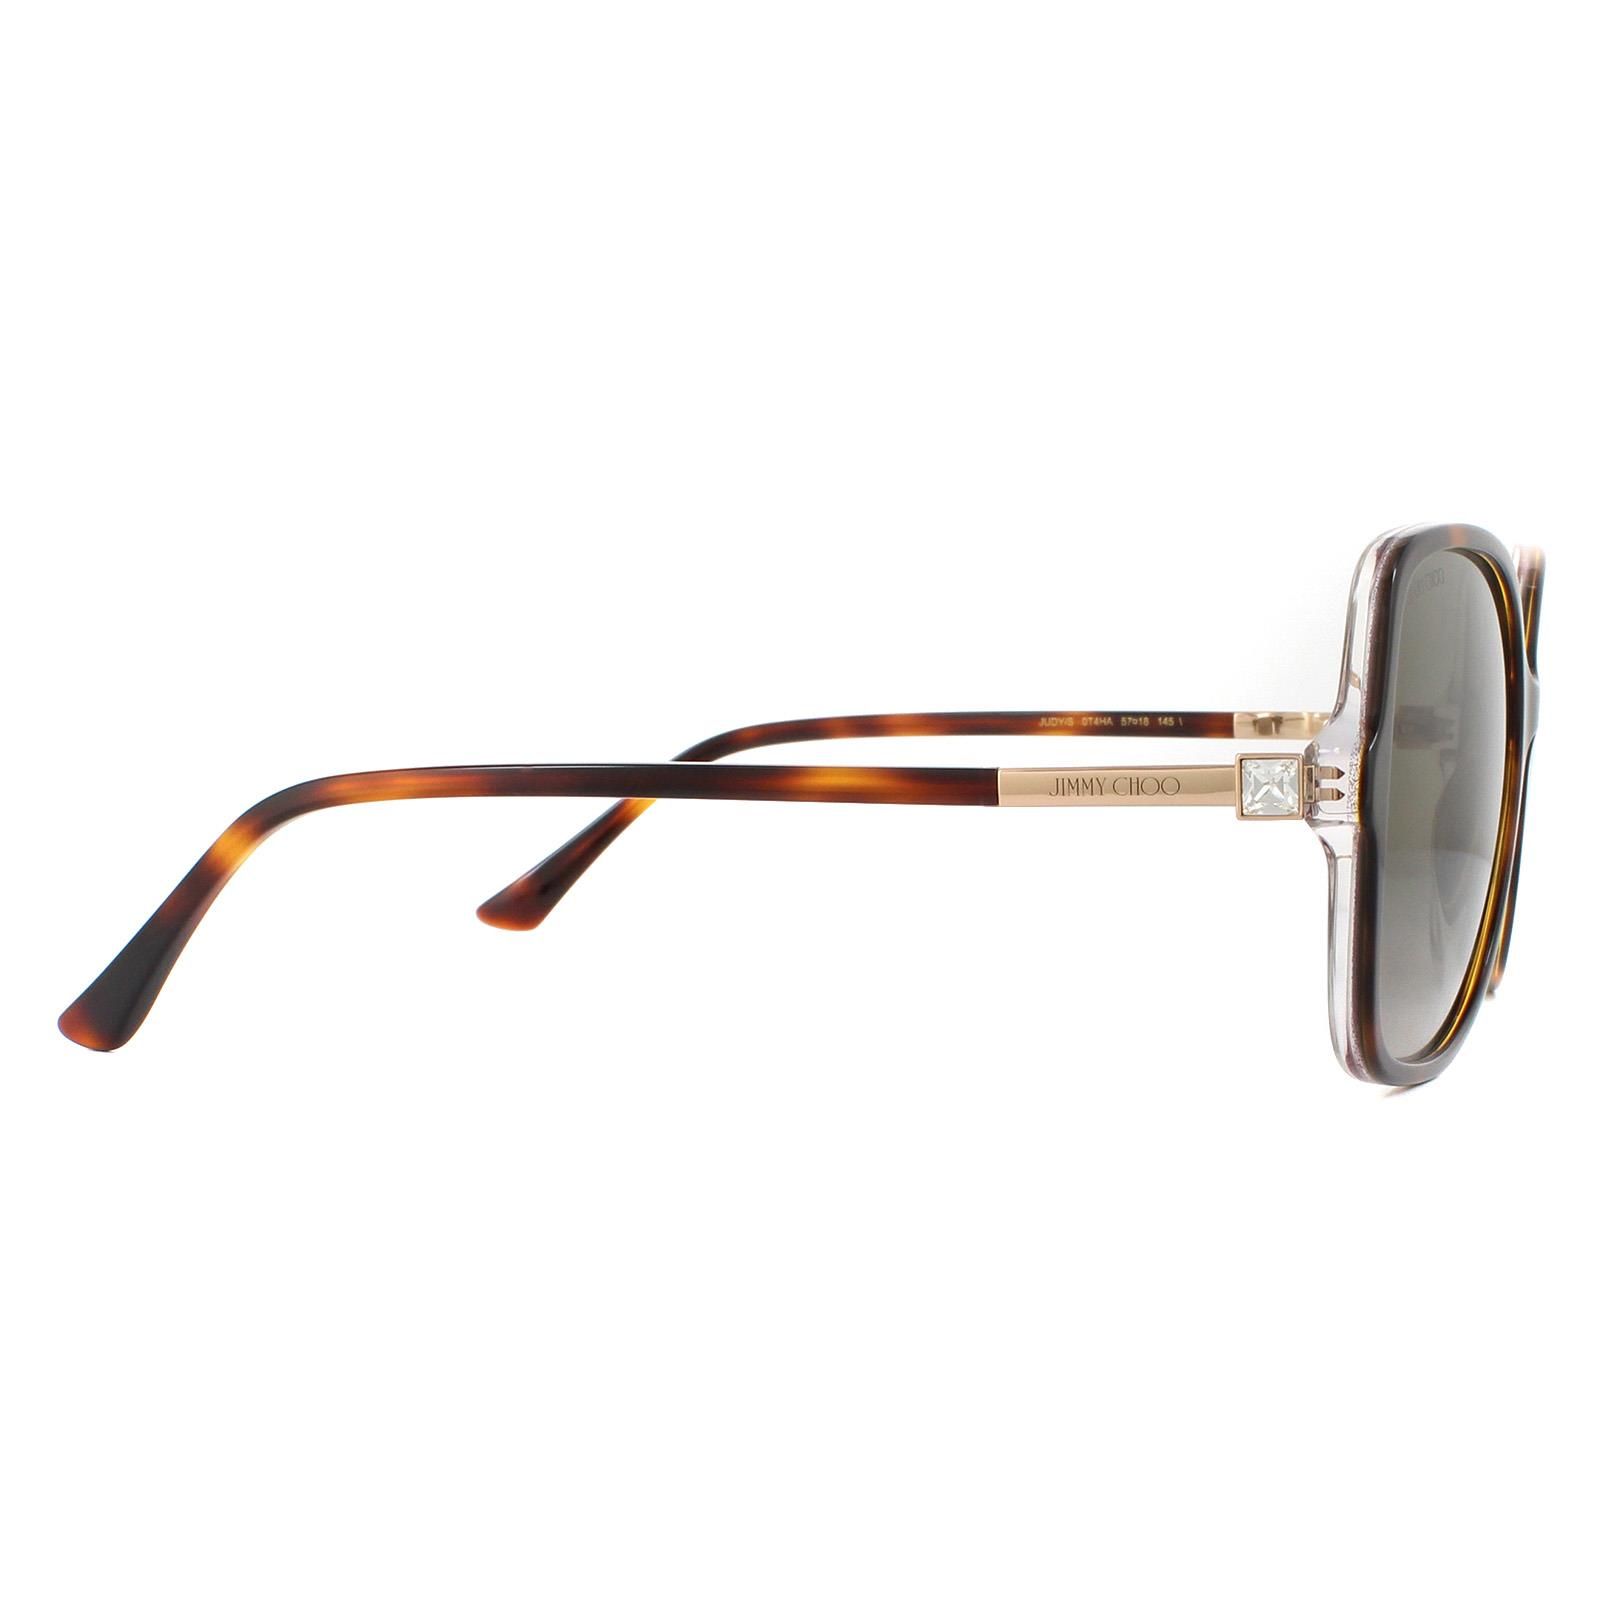 Jimmy Choo Sunglasses JUDY/S 0T4 HA Havana Pink Brown Gradient are an oversized and elegant butterfly style with super slim temples embellished with the Jimmy Choo logo .